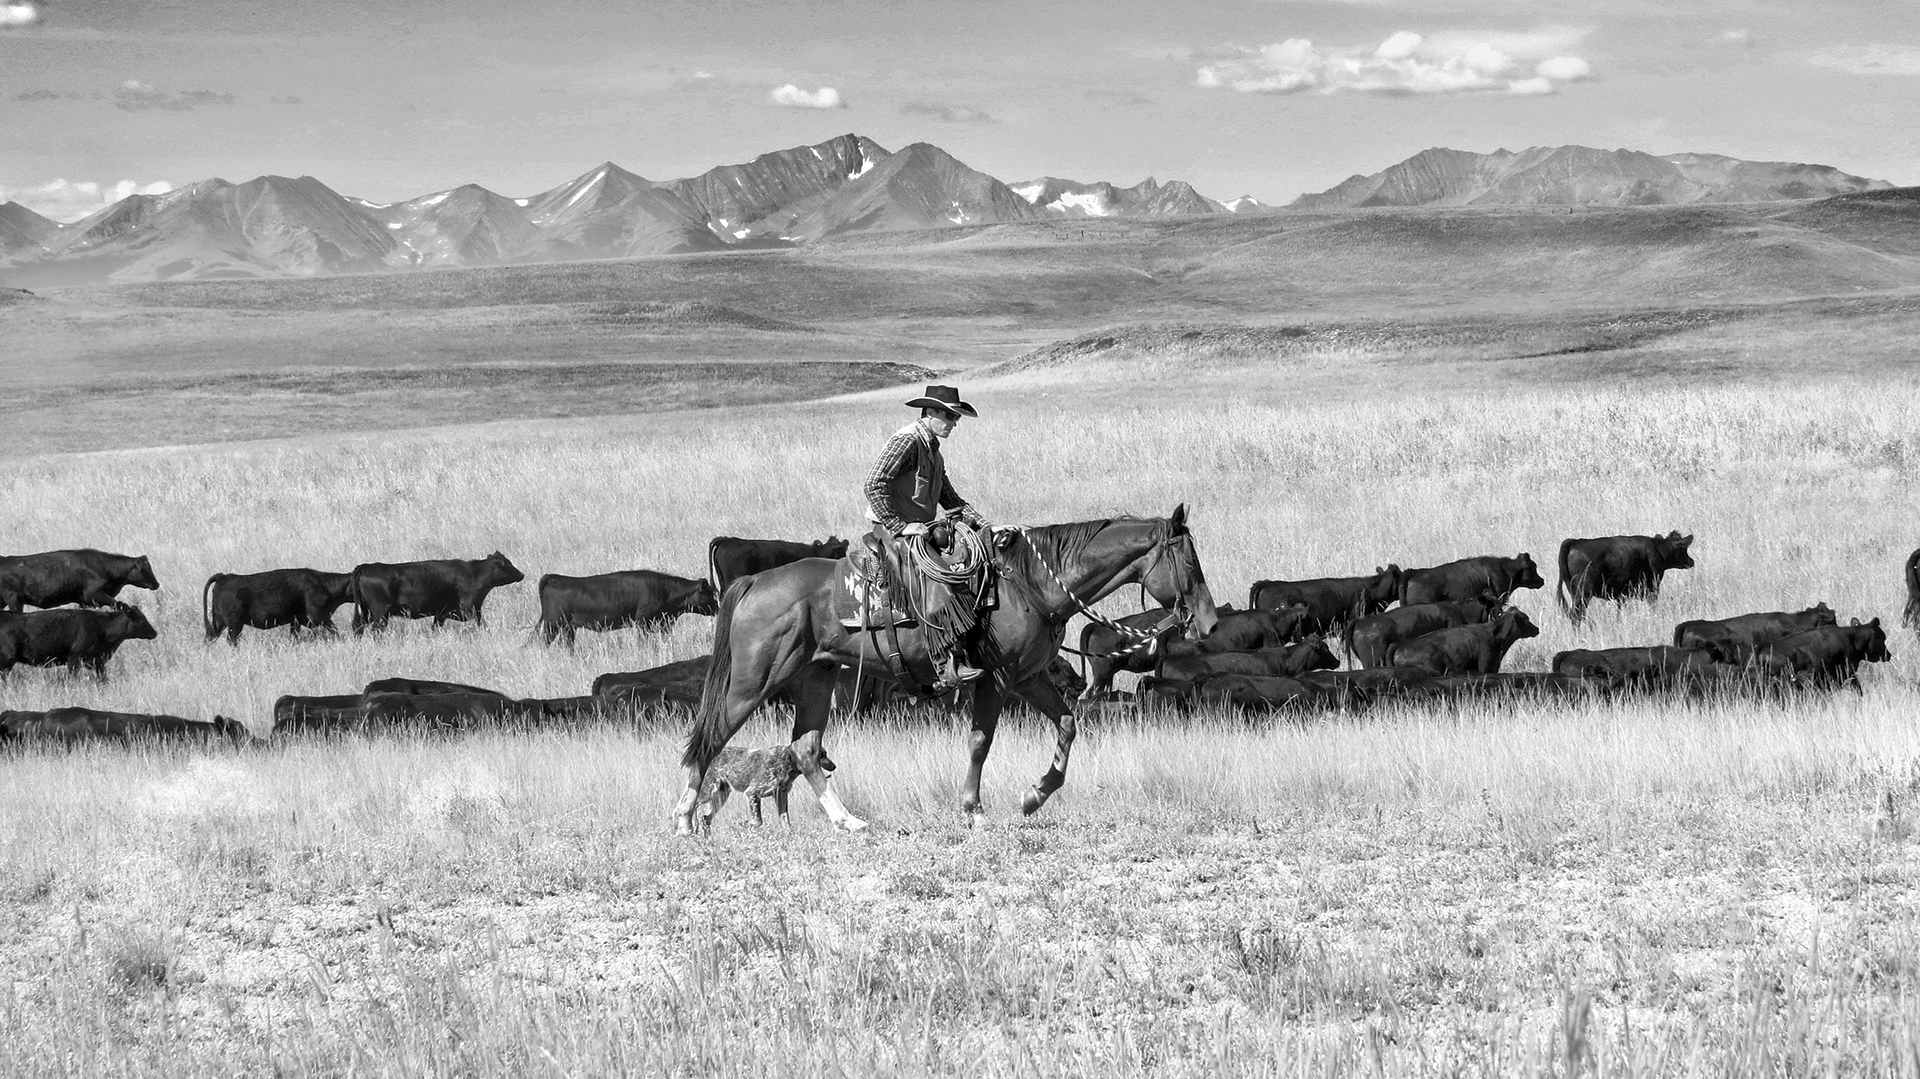 A man in a black cowboy hat rides a horse with a herd of cattle in the background. His dog walks next to the horses rear feet. Tall mountains are in the background.